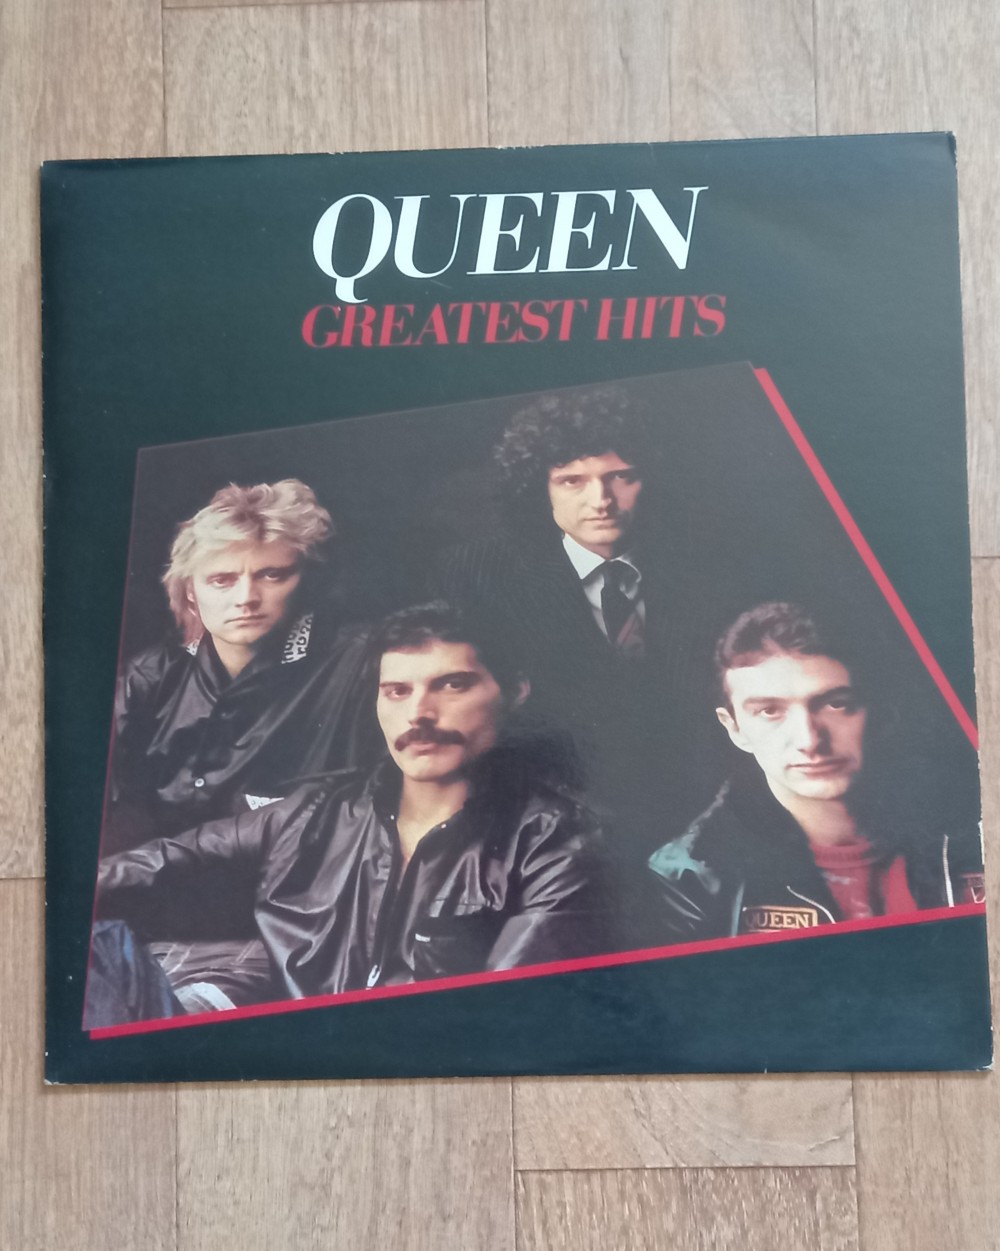 QUEEN - Greatest Hits (40track, CD, Album at Vinylom Marketplace